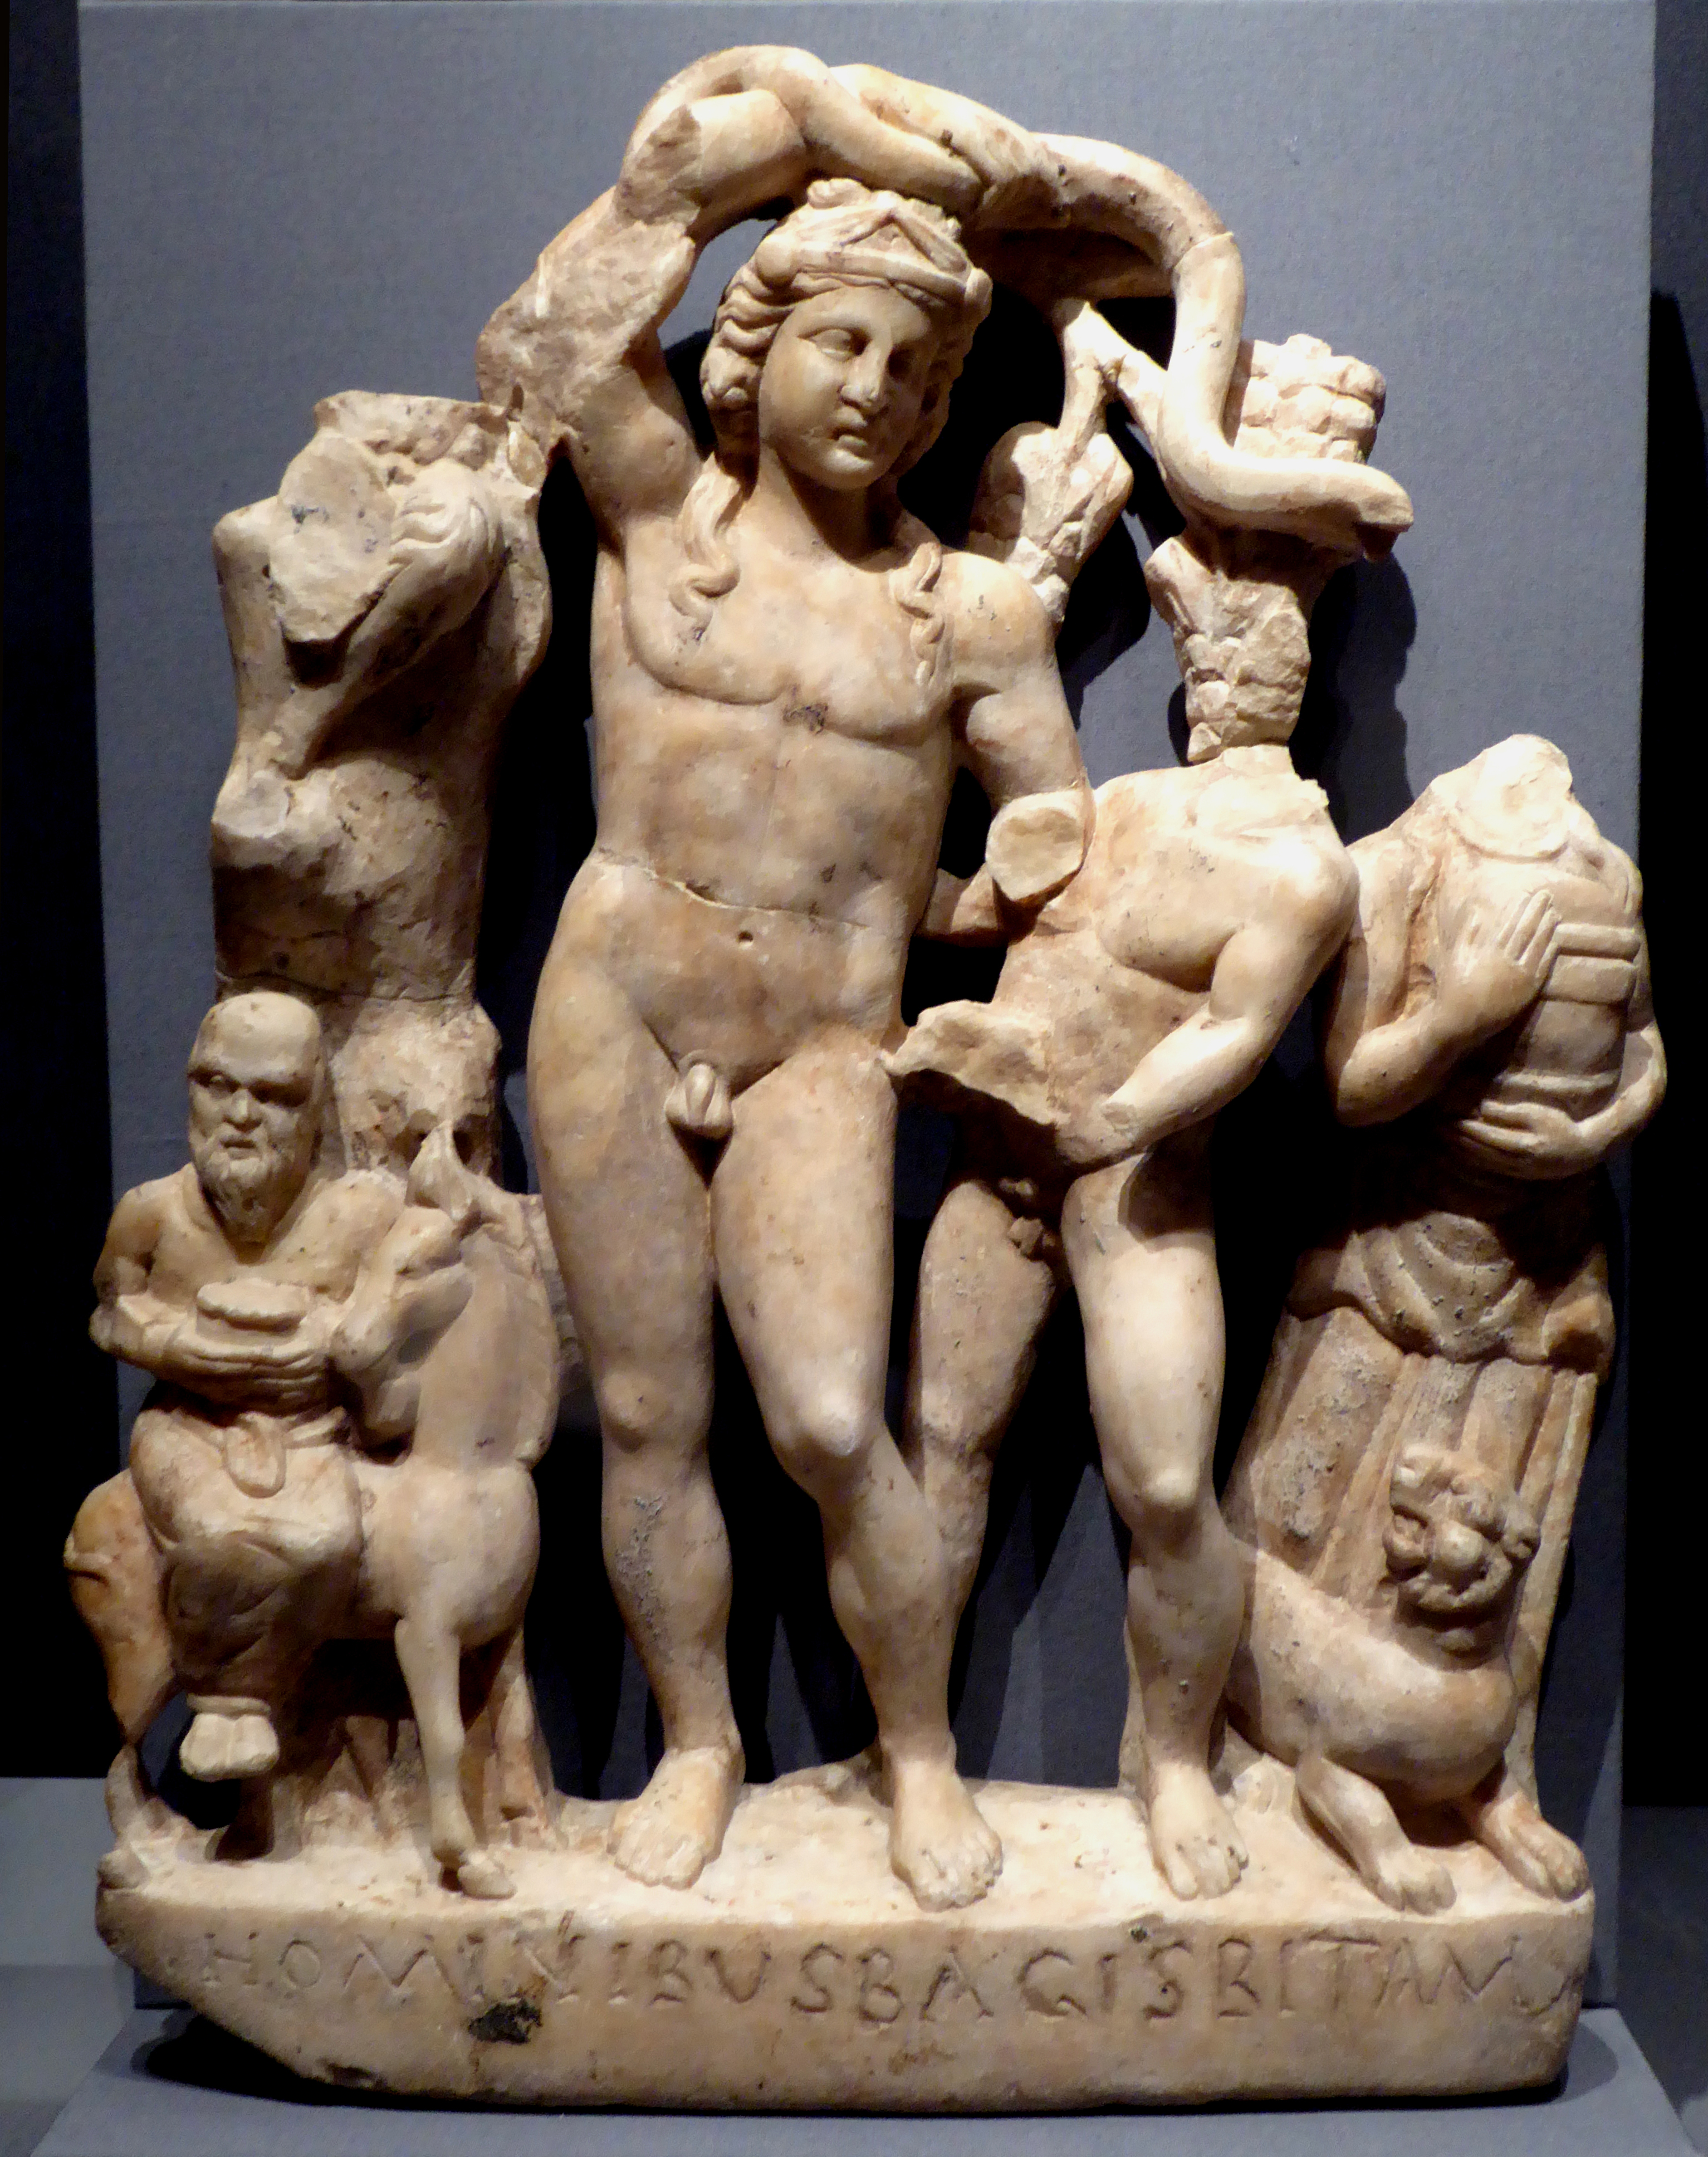 Bacchus group at Mithra temple, Museum of London, inv. 18496, Ethan Doyle White /Wikimedia Commons CC BY-SA